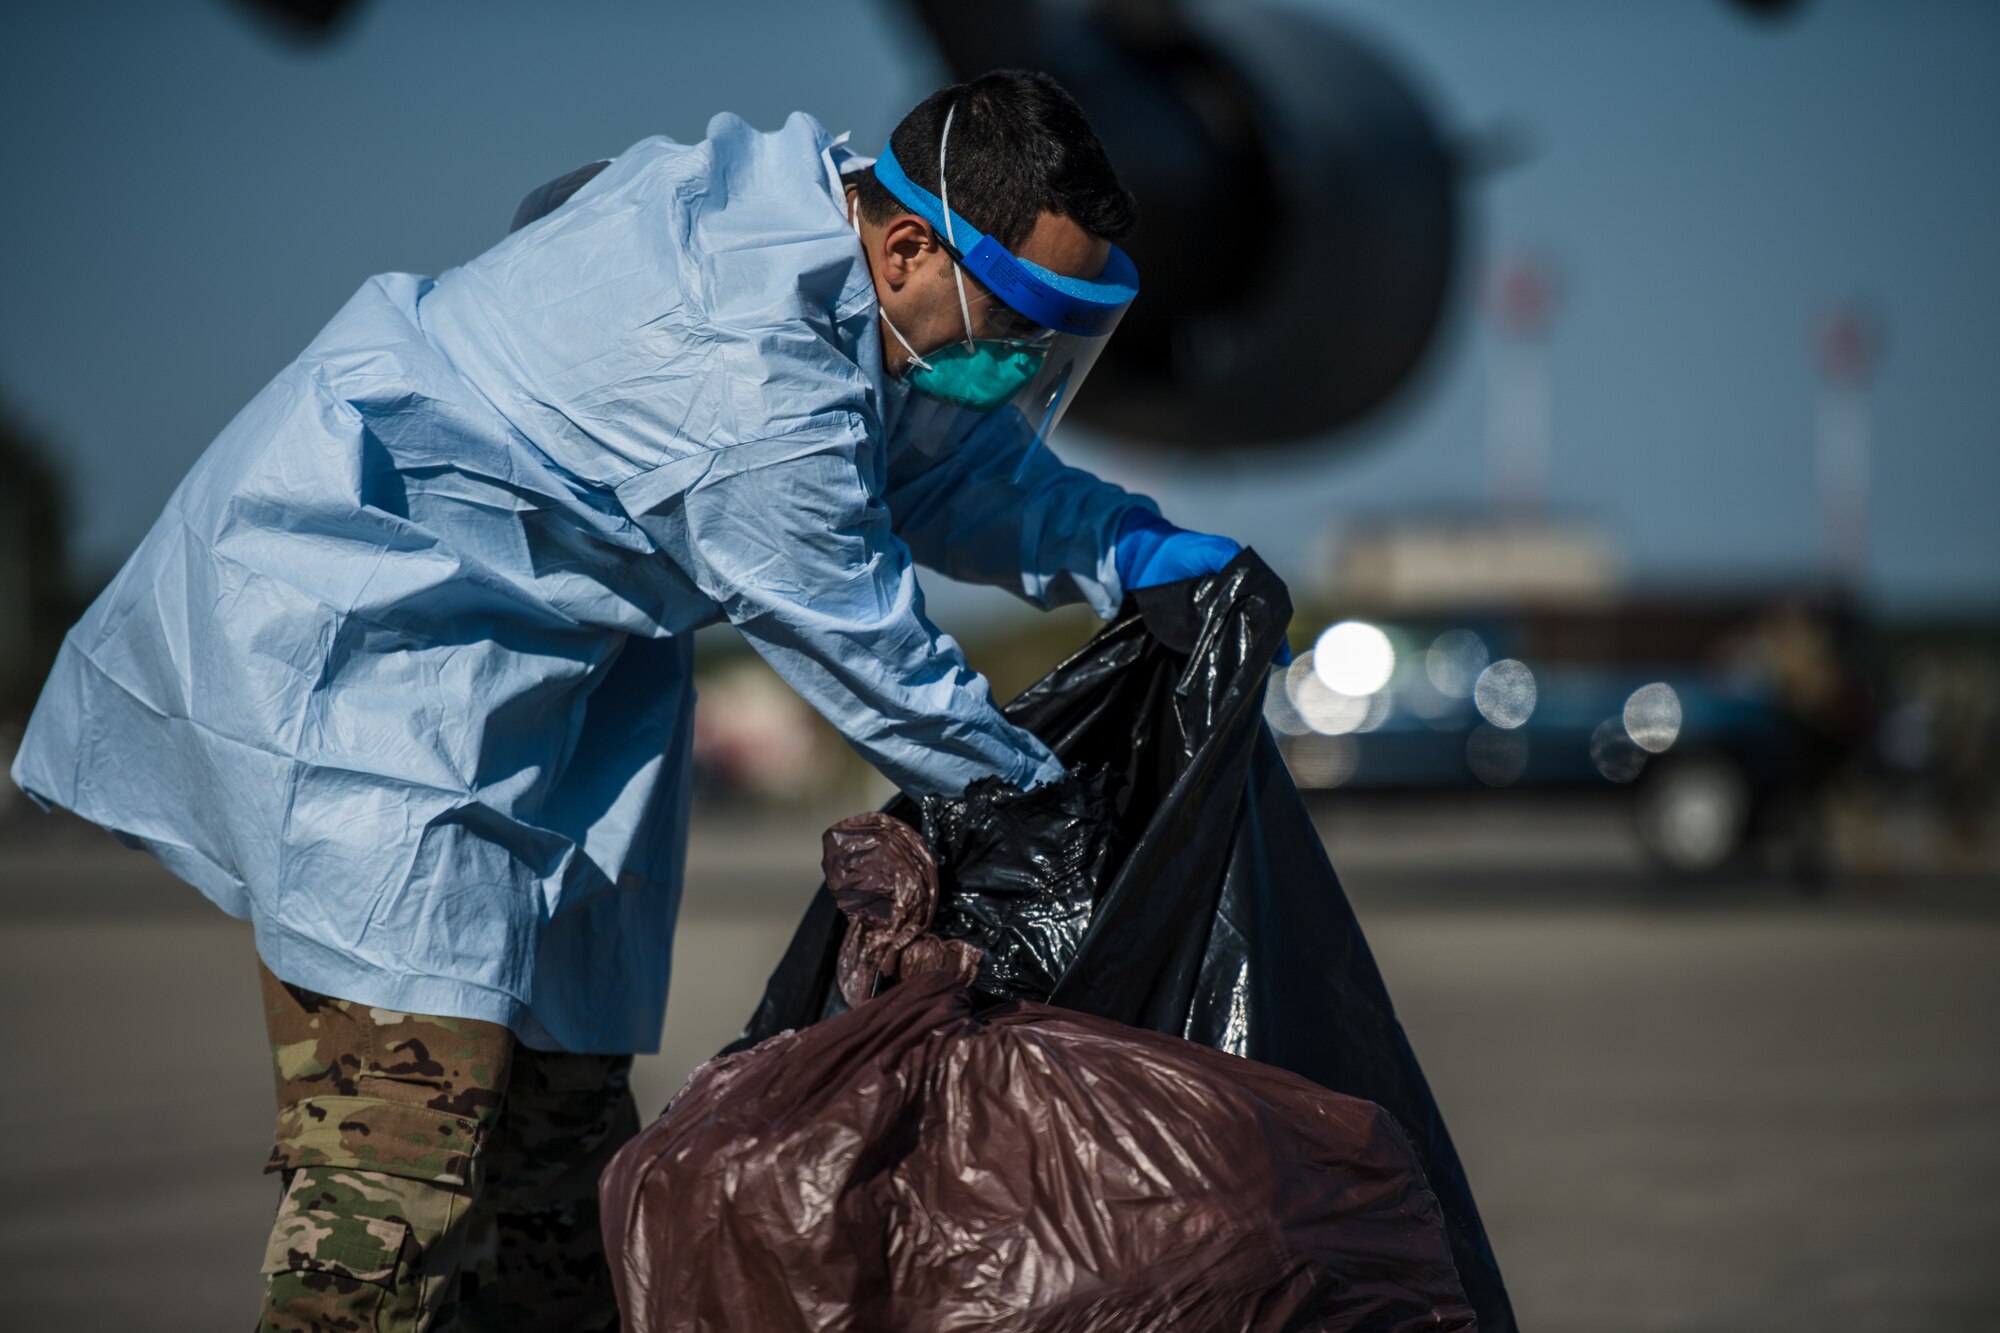 U.S. Air Force Senior Airman Danny Abad, 313th Expeditionary Operations Support Squadron aeromedical evacuation technician, sorts through COVID-19 patients’ belongings at Ramstein Air Base, Germany, May 16, 2020.